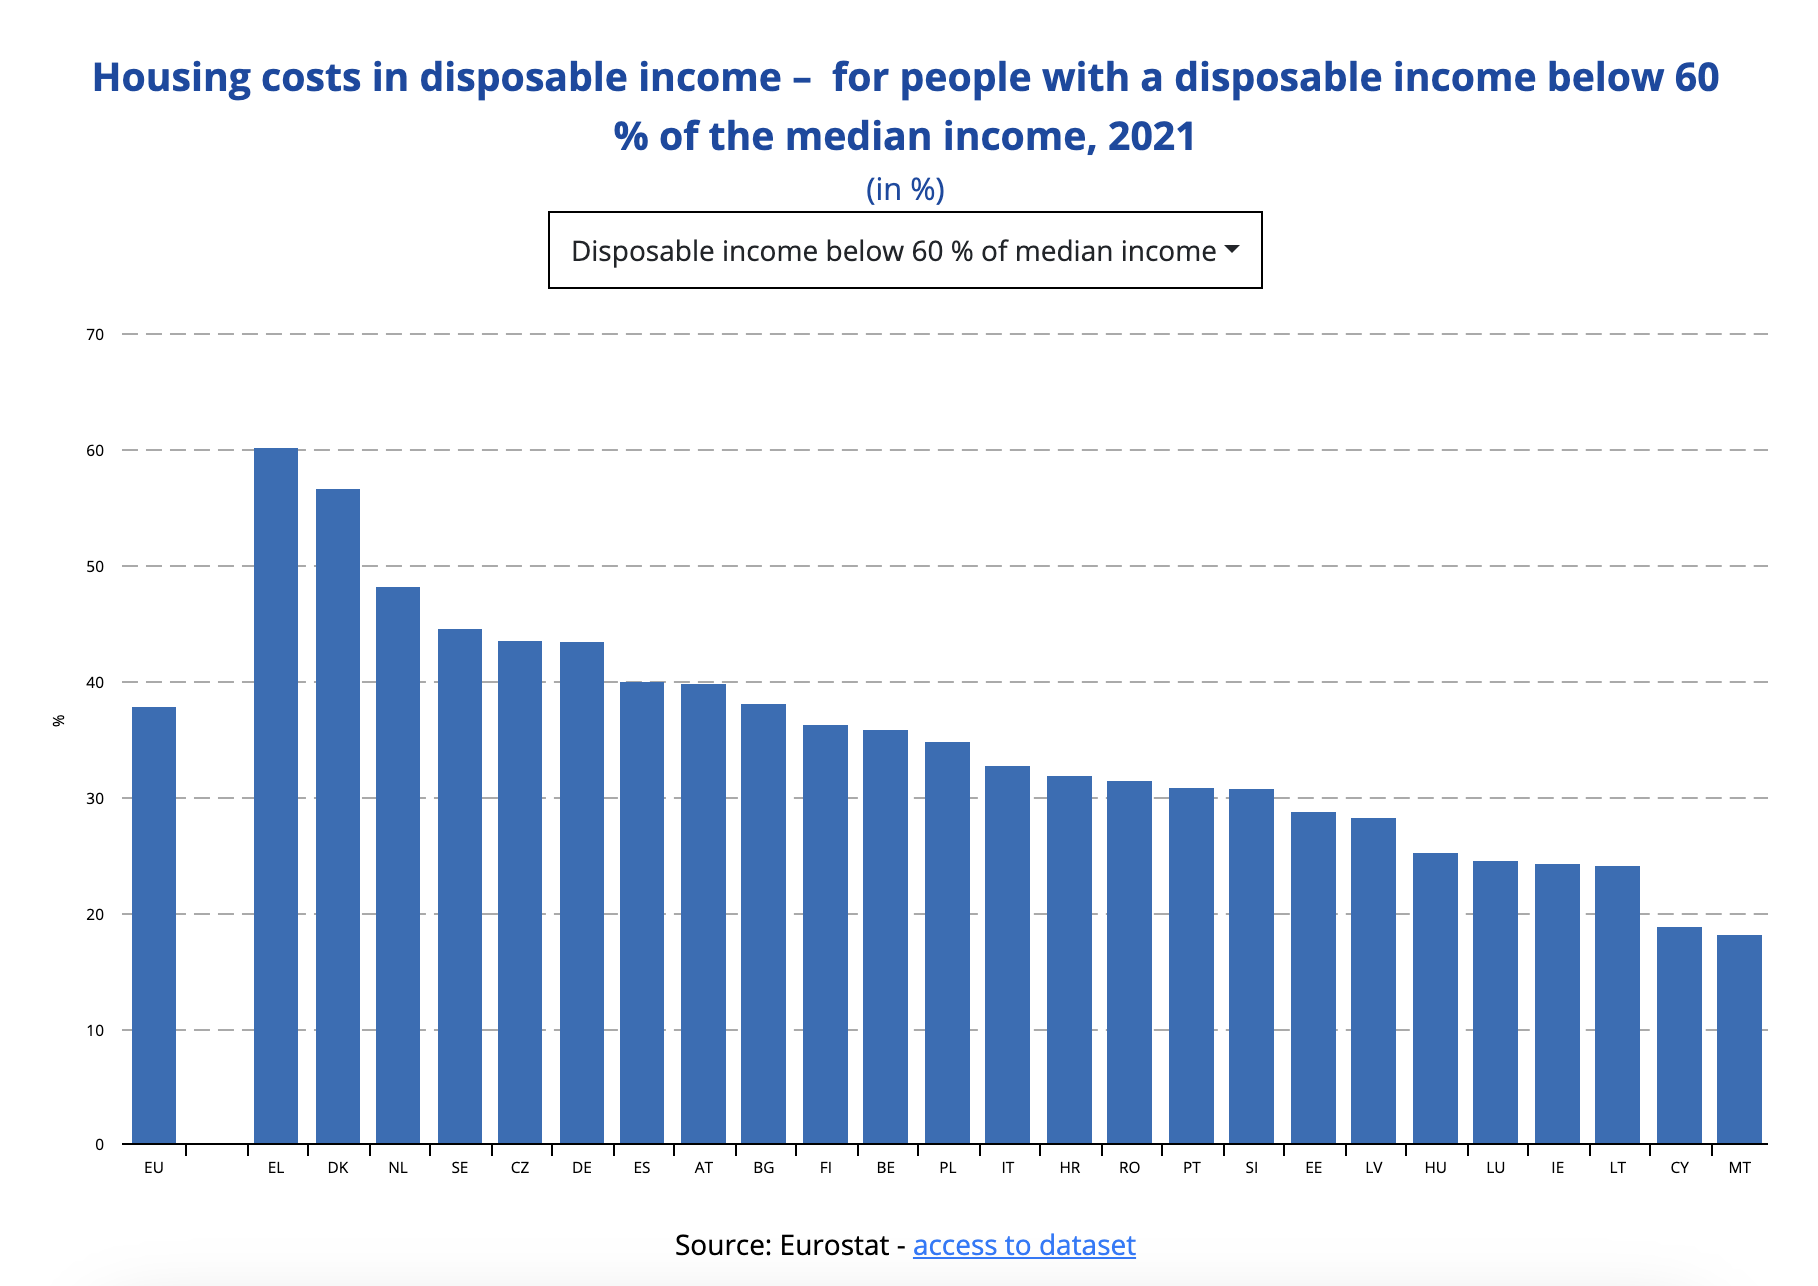 Interactive publication: Housing costs in disposable income - for people with a disposable income below 60% of the median income, in %, 2021